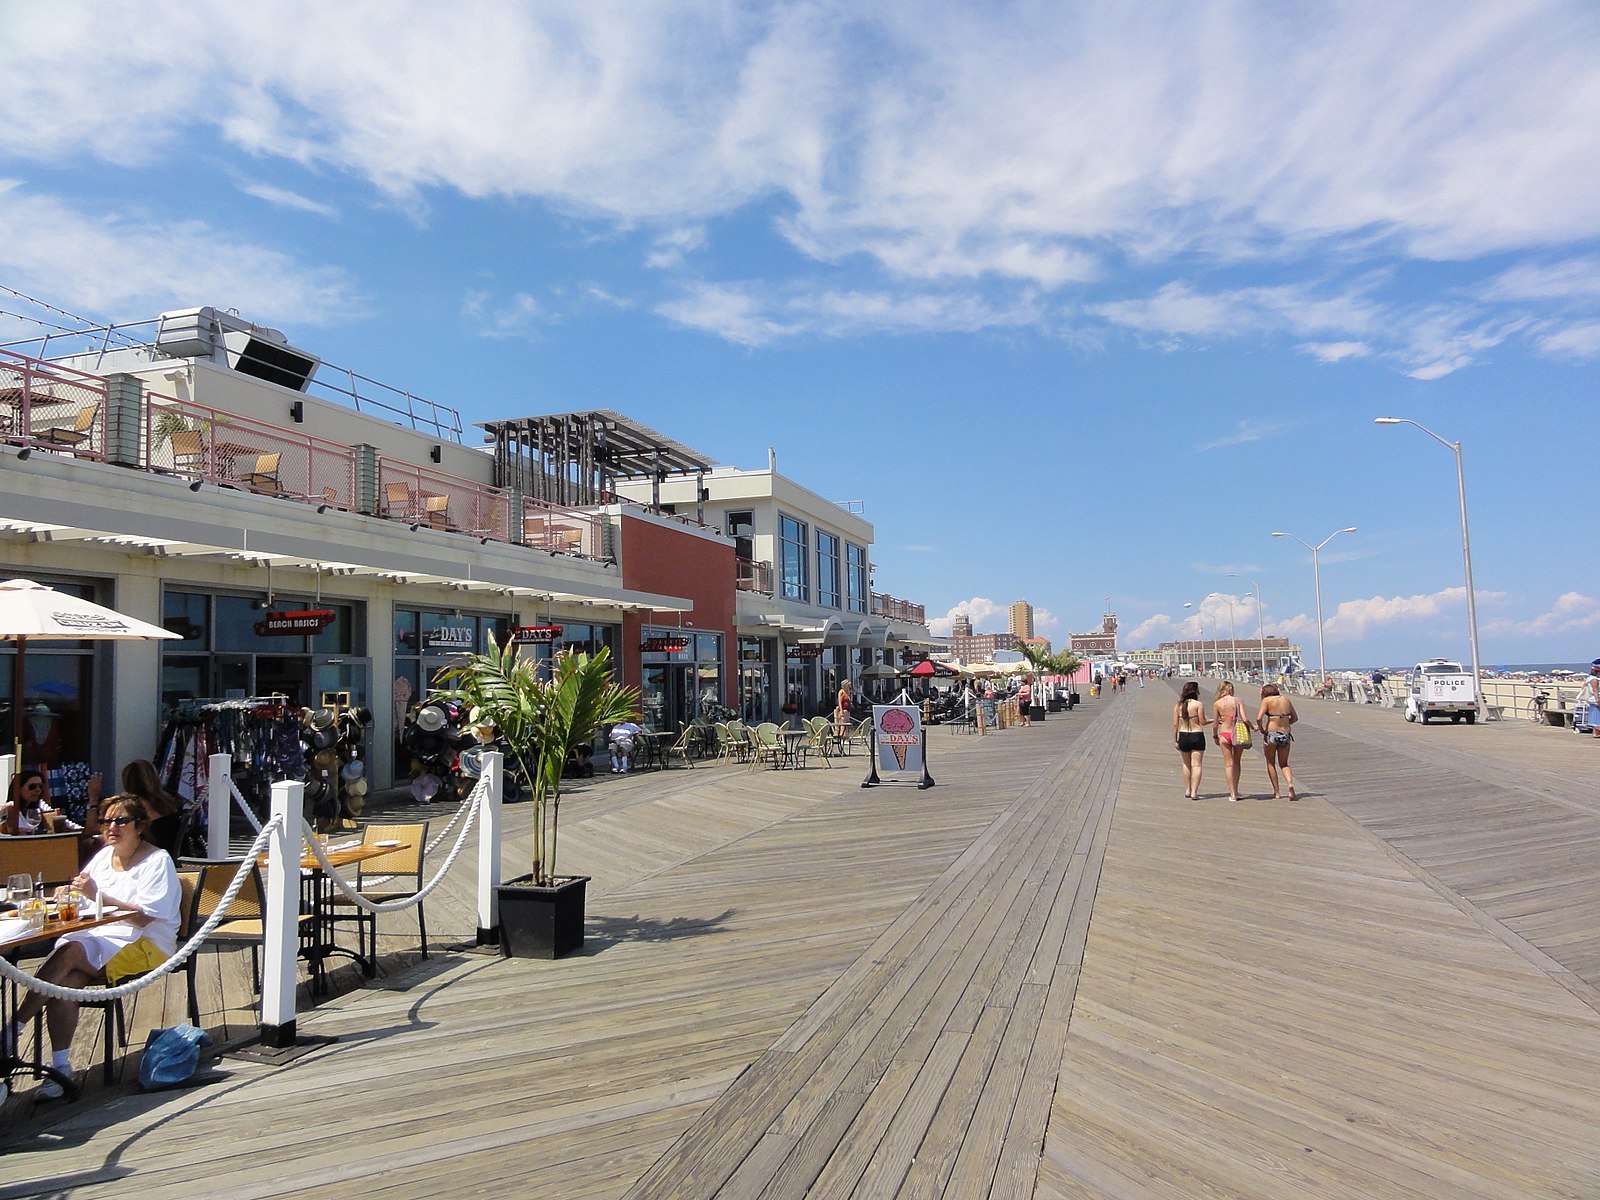 26 Best Things to Do in New Jersey to 